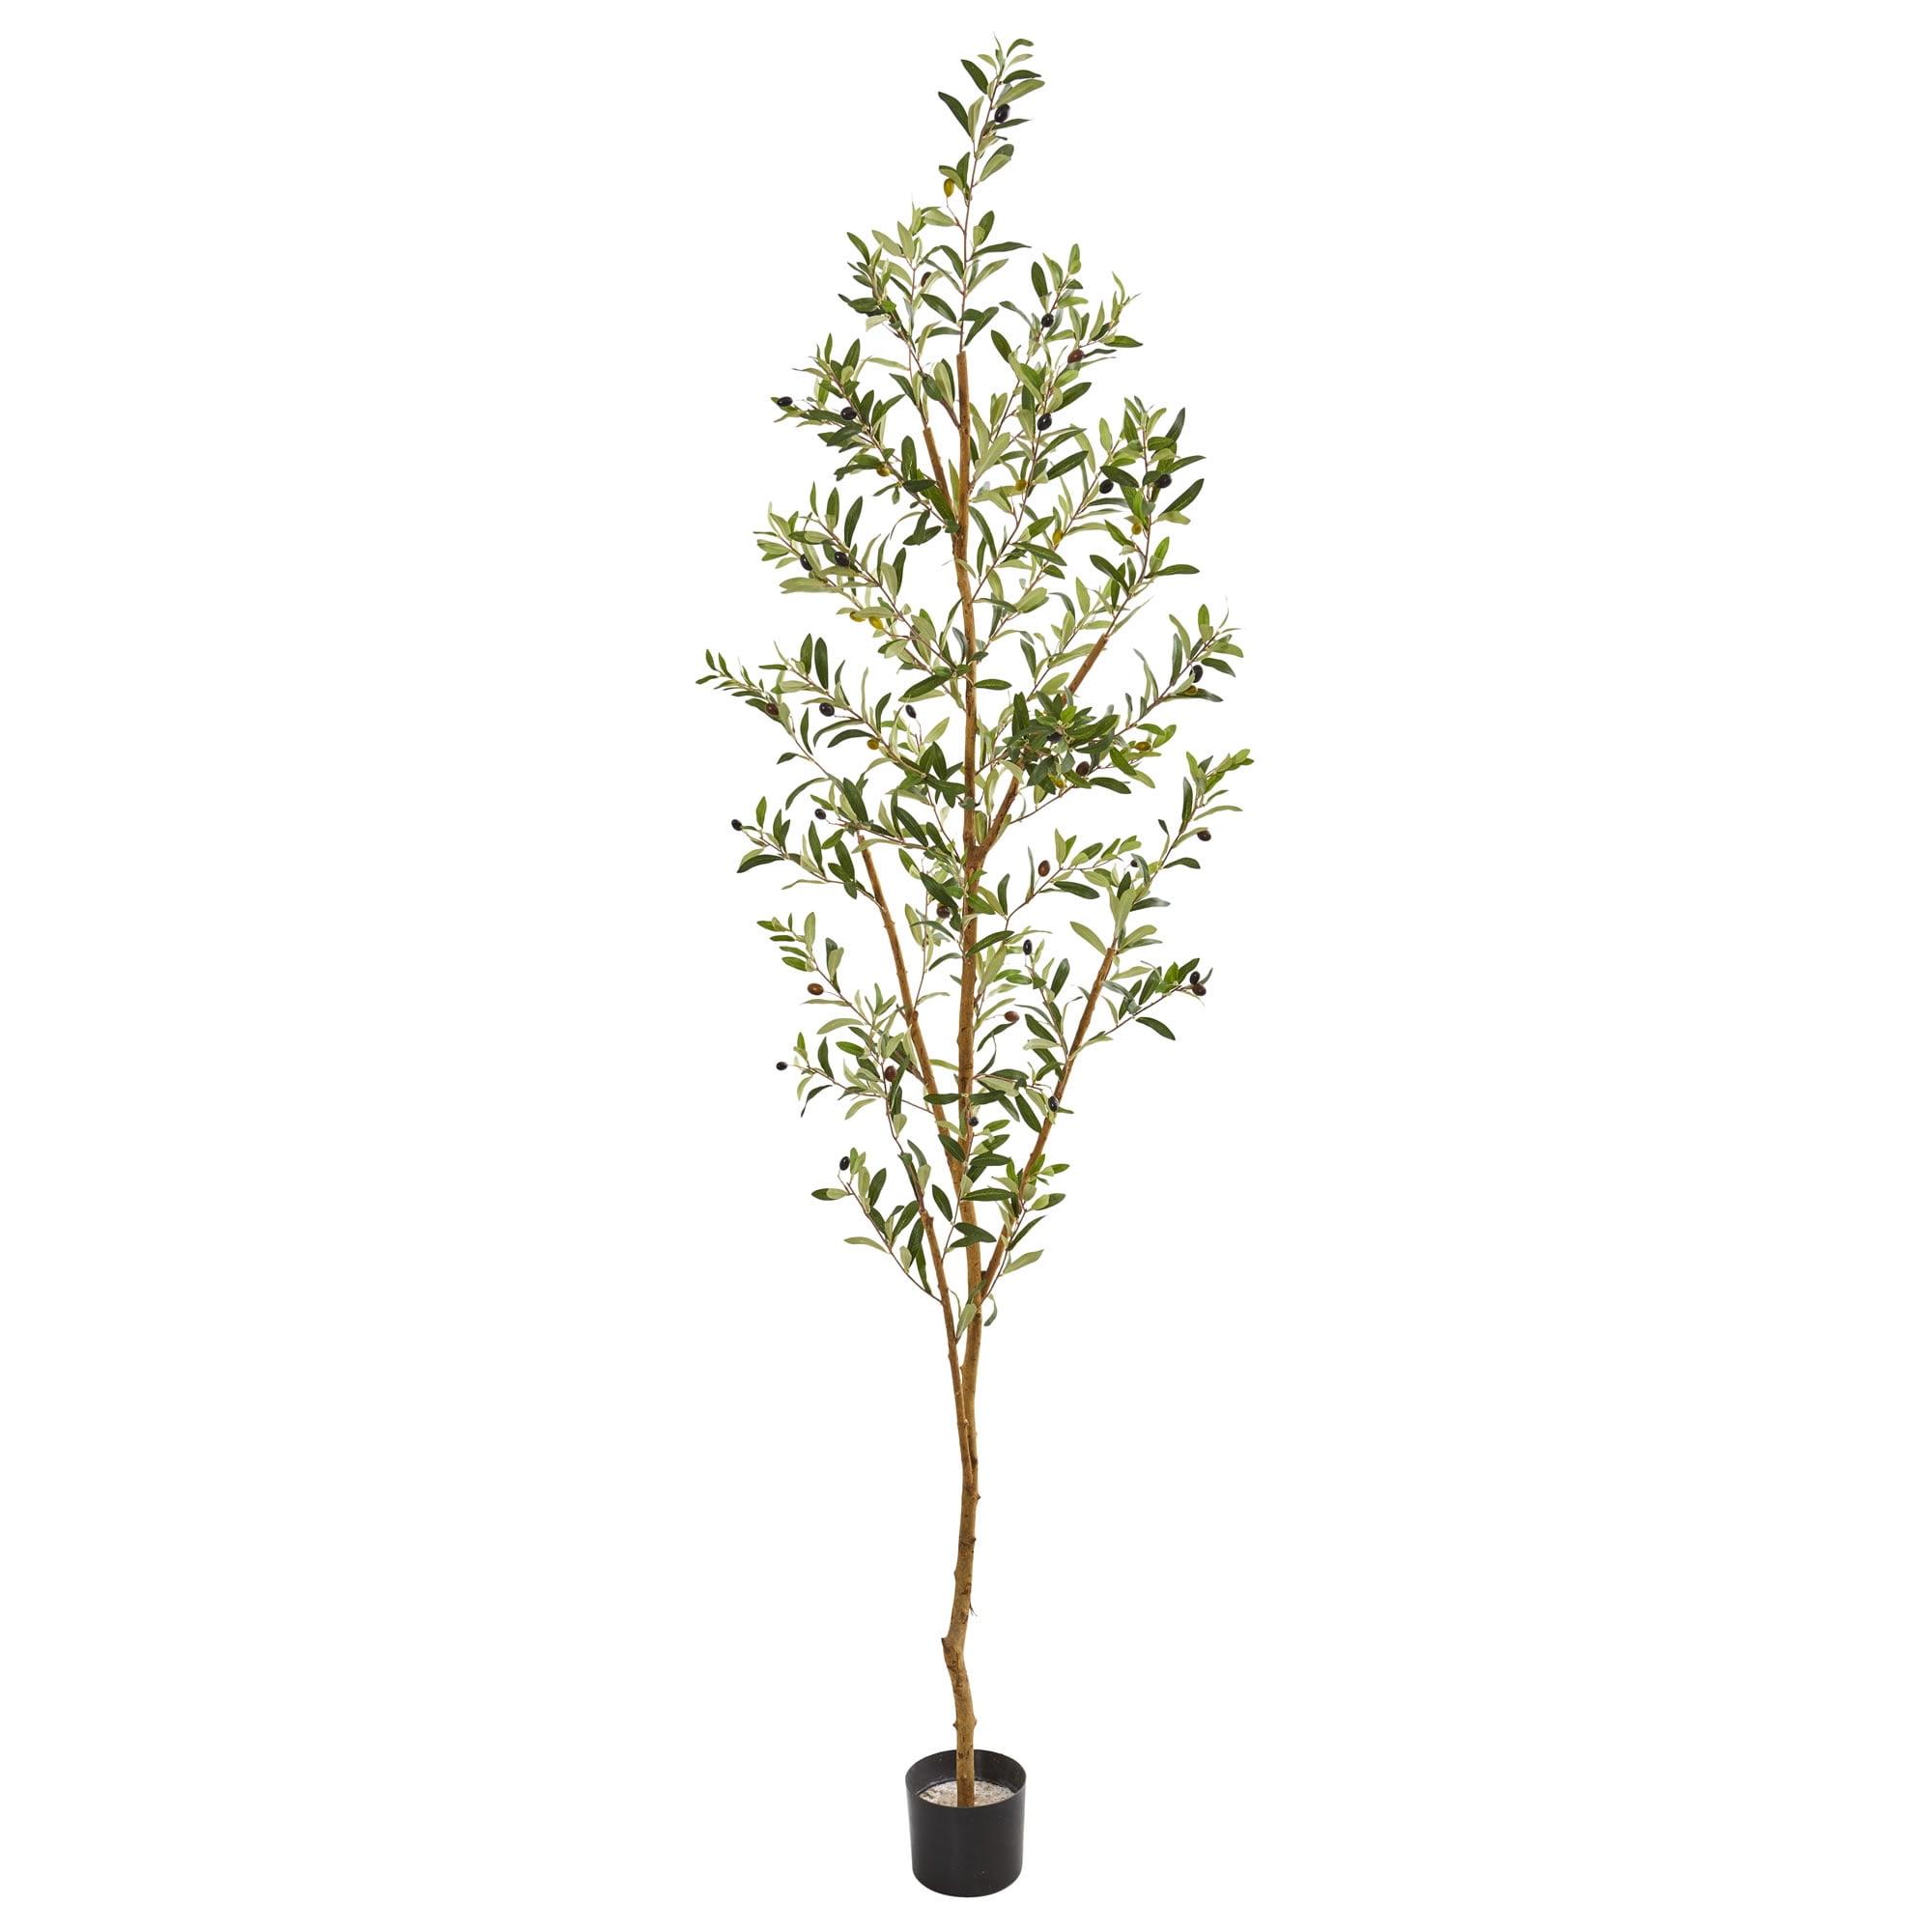 Shop Nearly Natural 82” Olive Artificial Tree - Walmart.com from Walmart on Openhaus